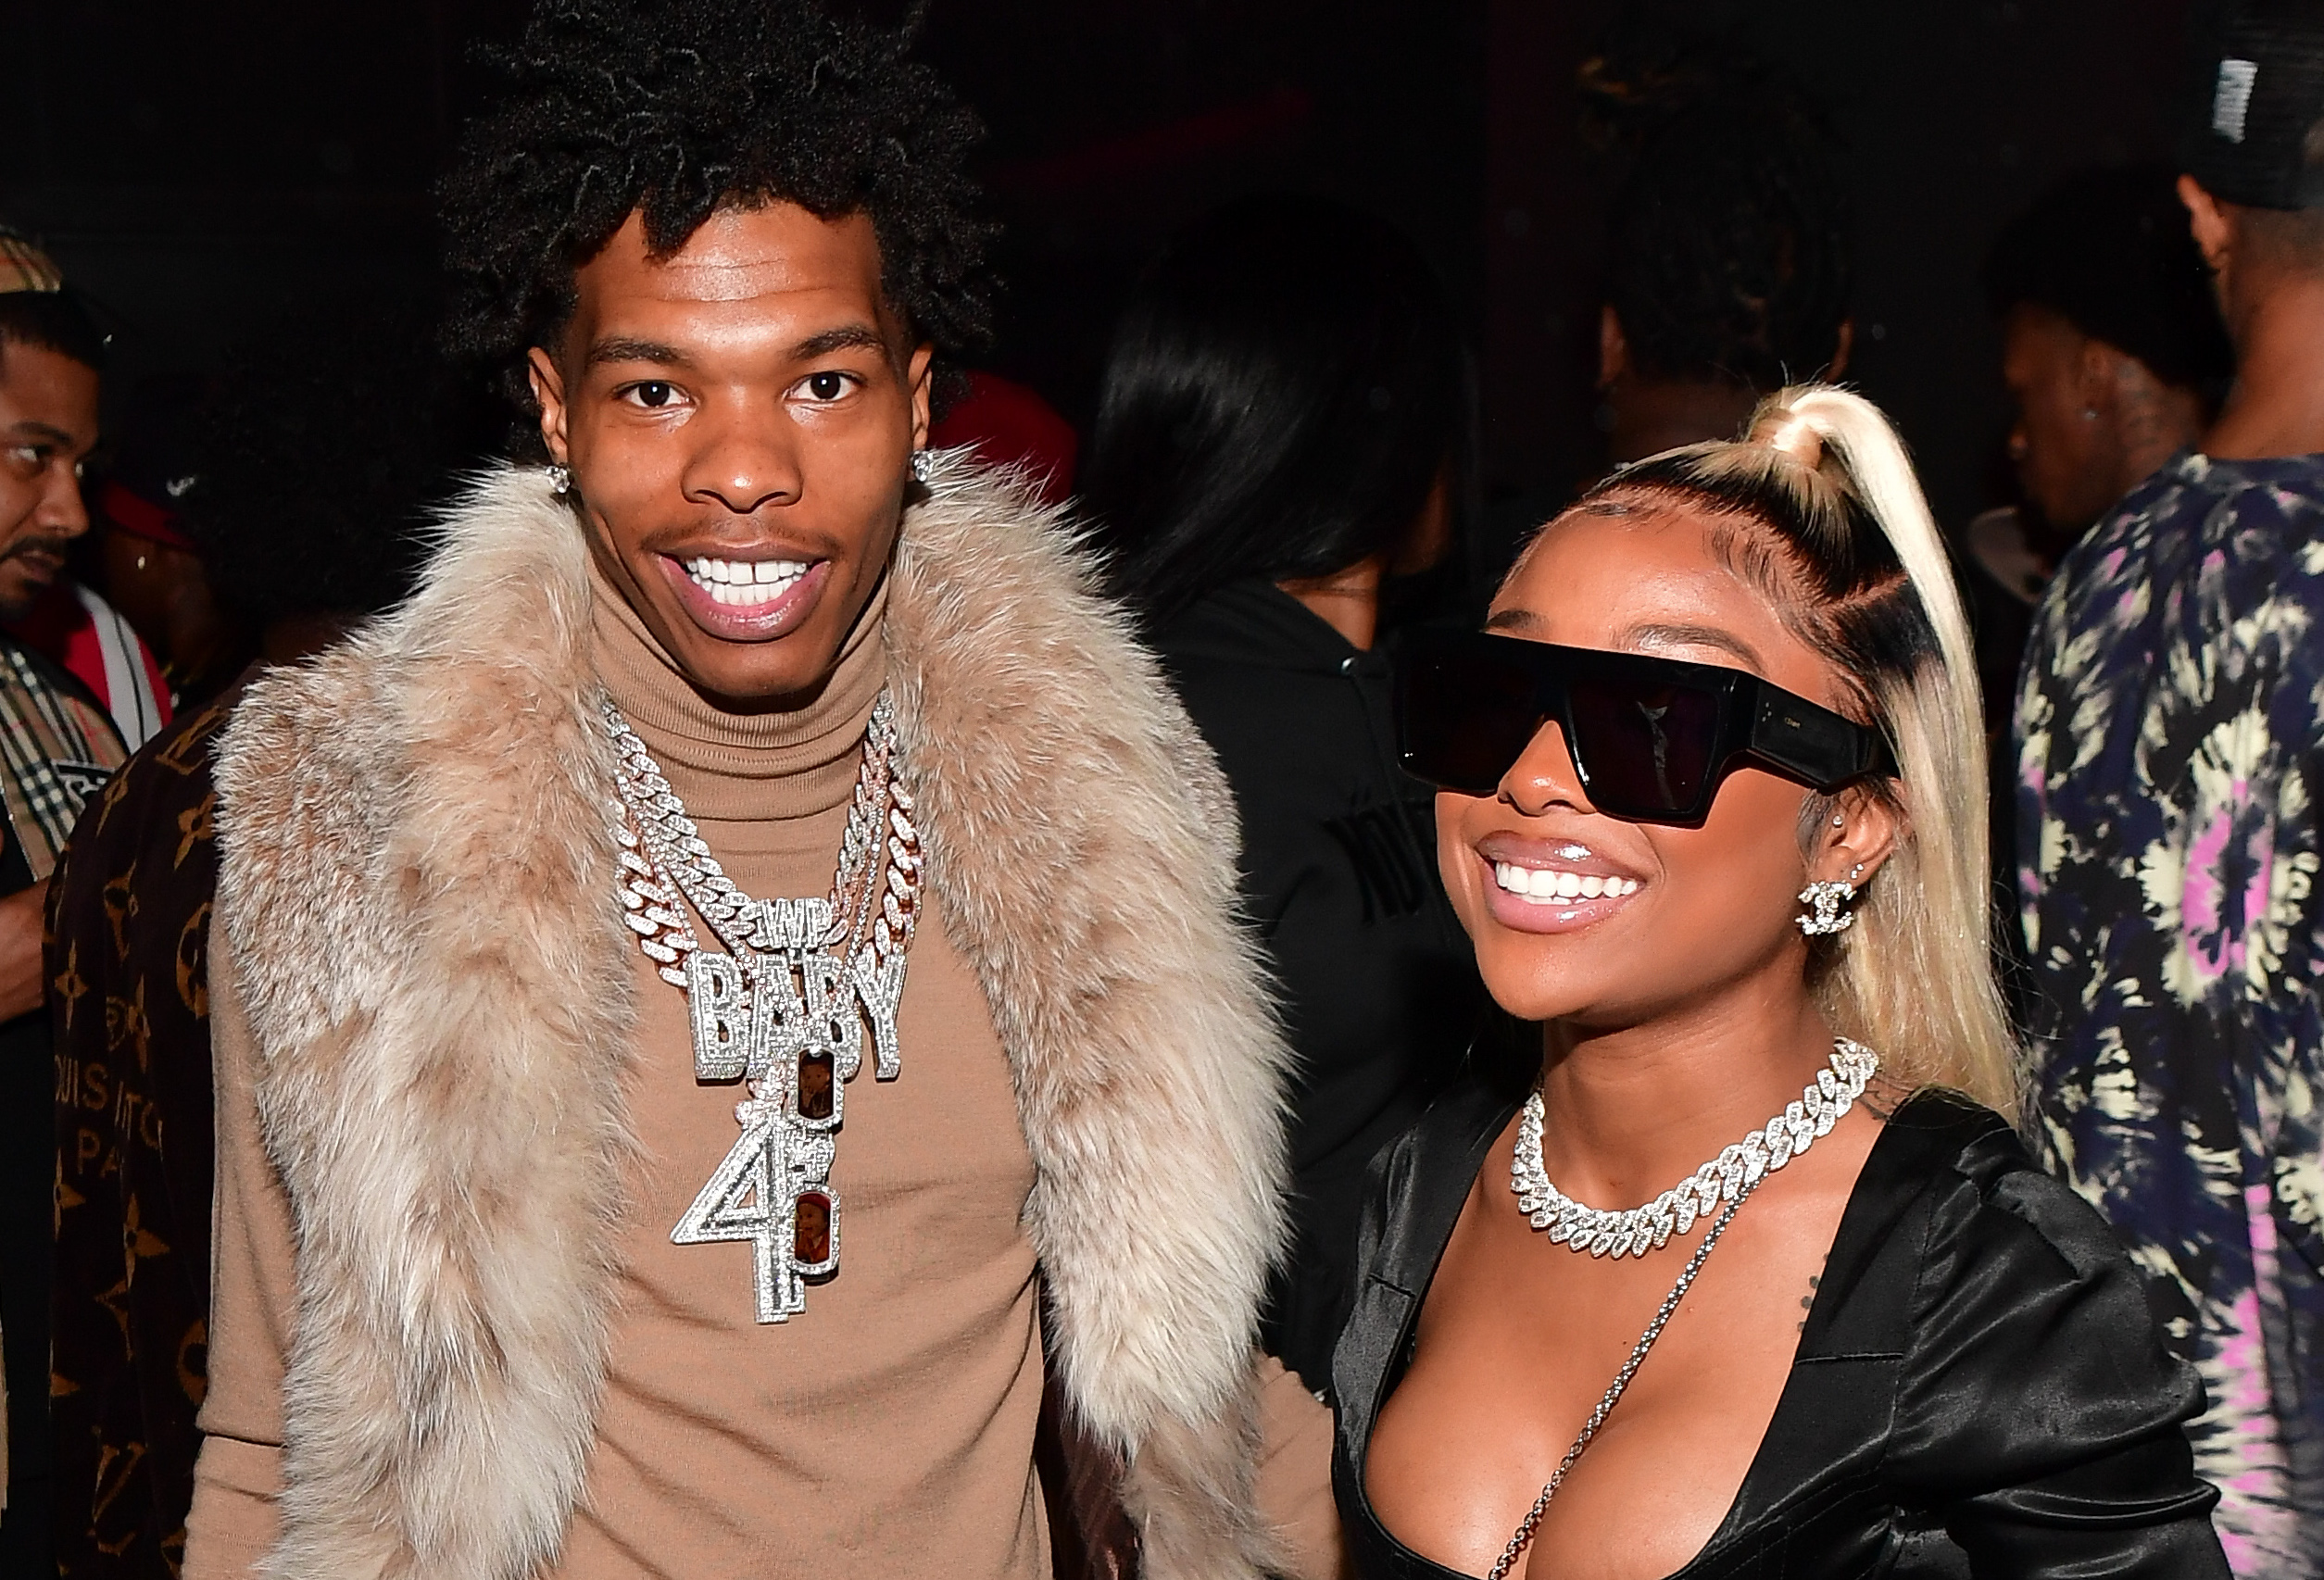 Take A Look Inside Lil Baby's Iced Out Birthday Extravaganza